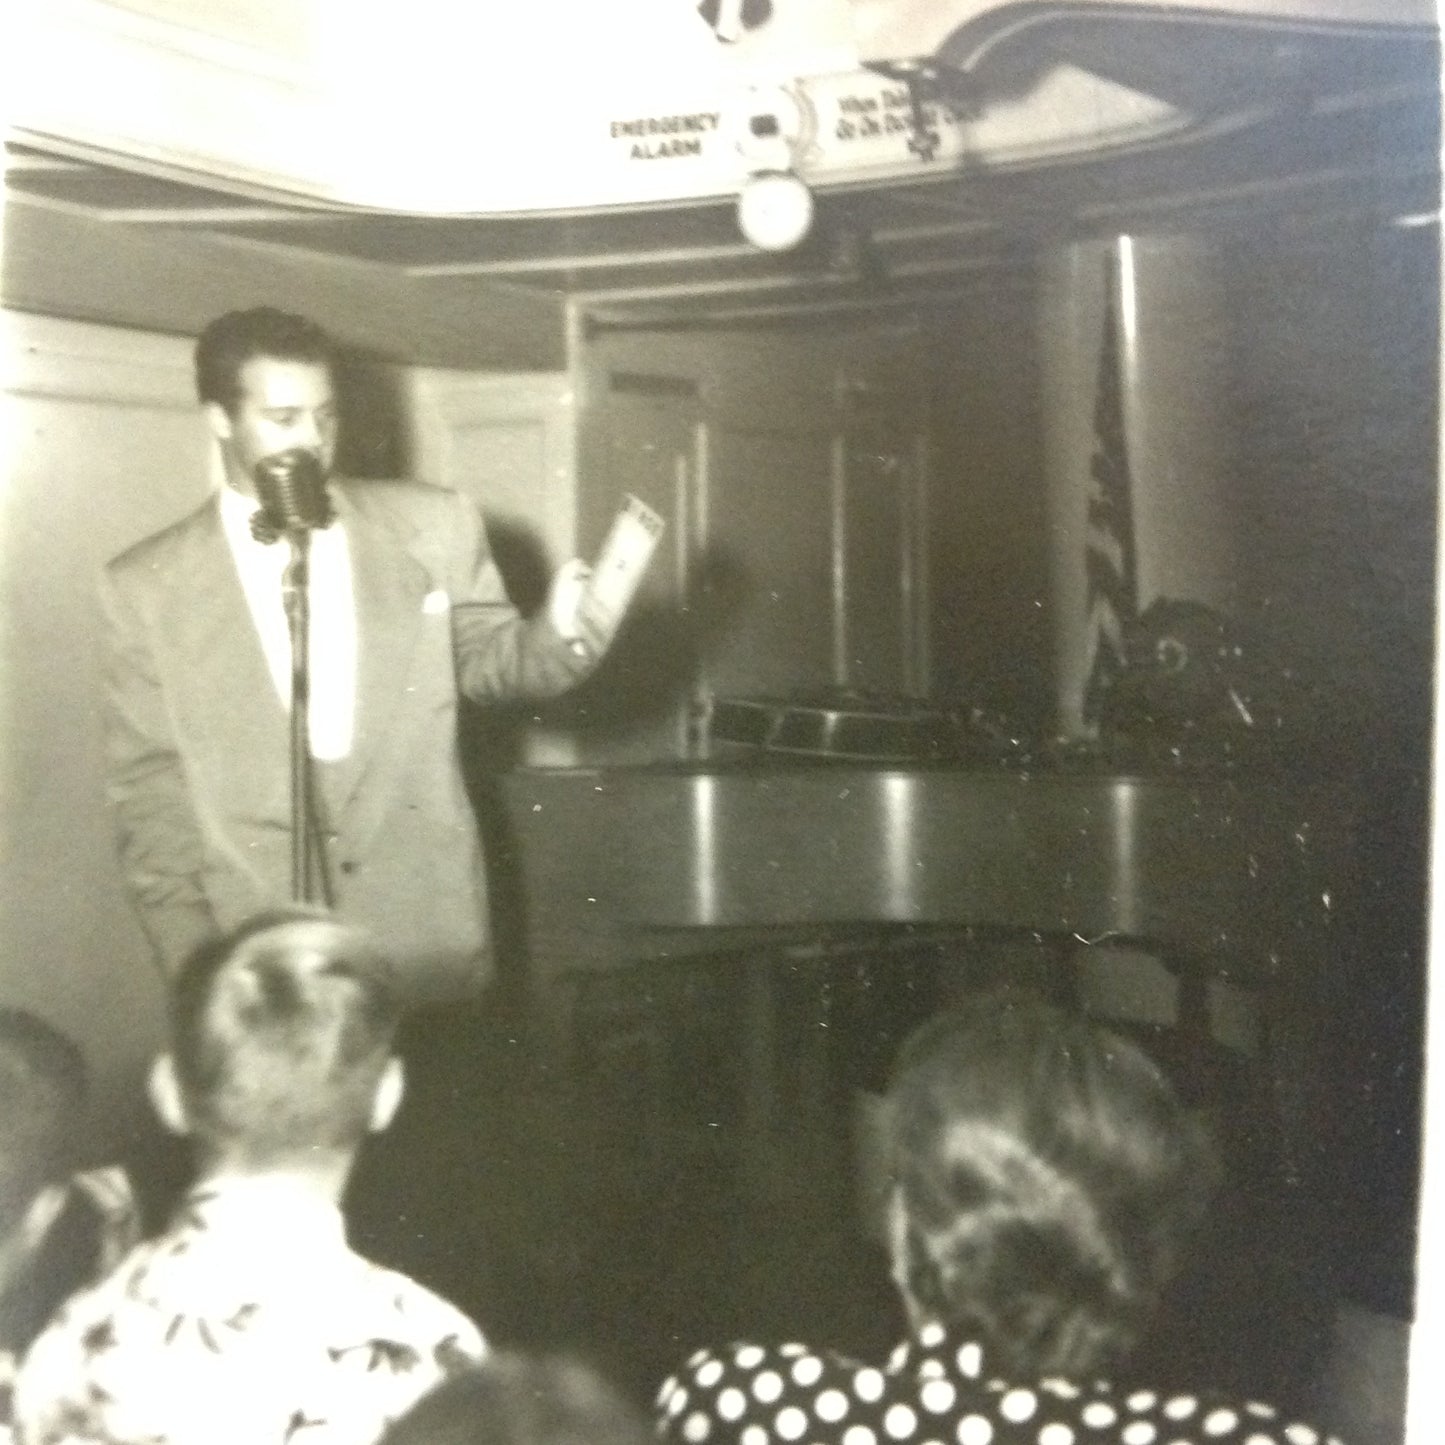 Vintage Mid Century B&W Photo SS South American Cruise Show Emcee at the Mic